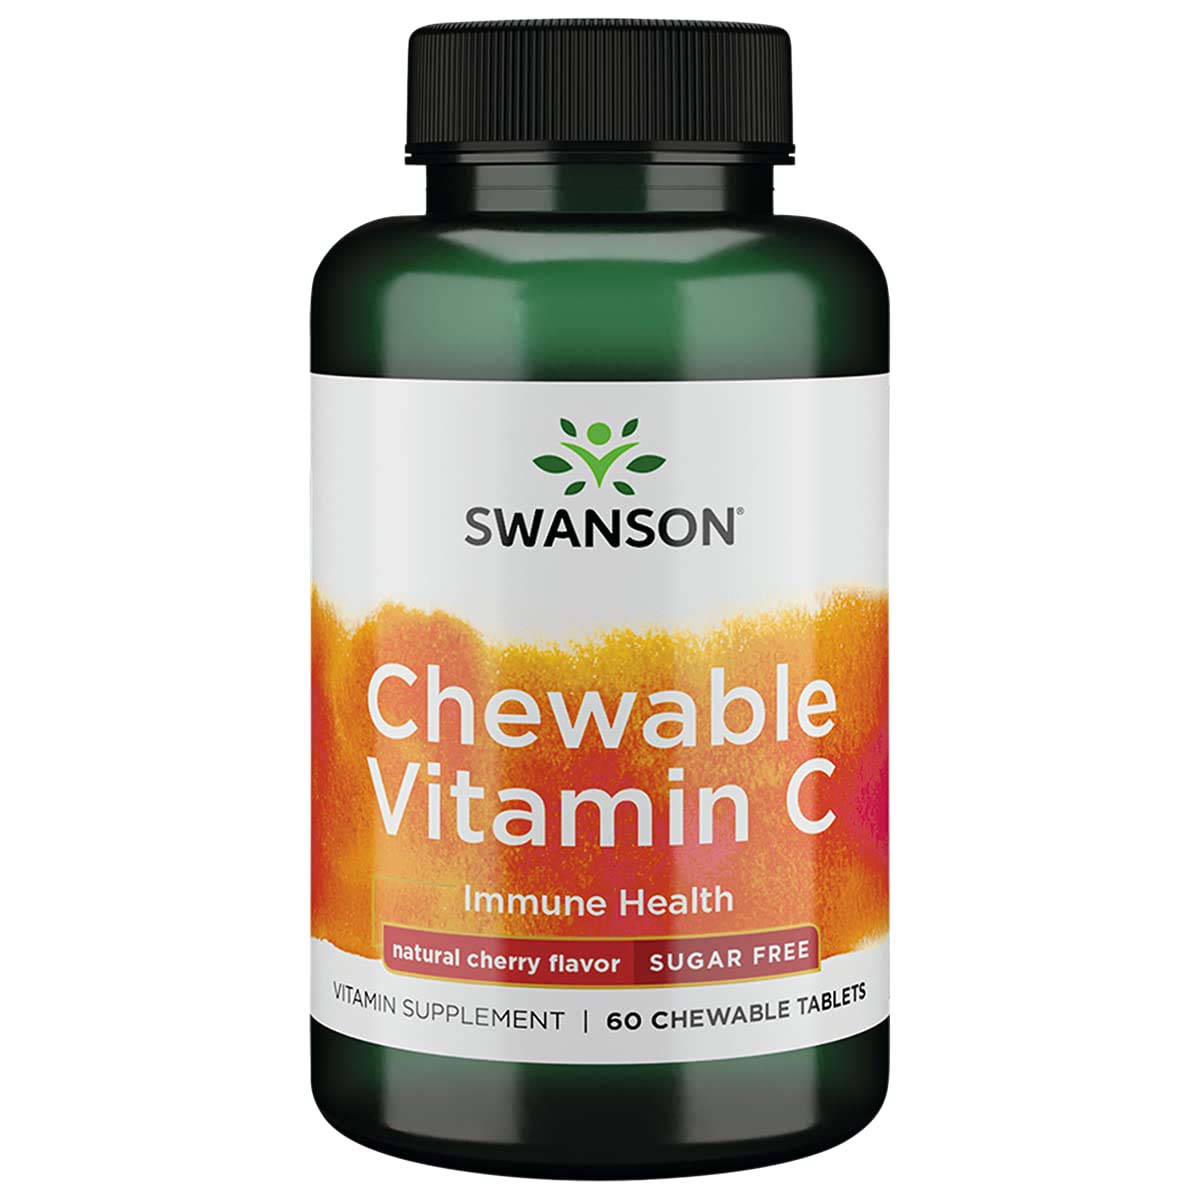 Swanson Chewable Vitamin C, Cherry, 60 Chewable Tablets